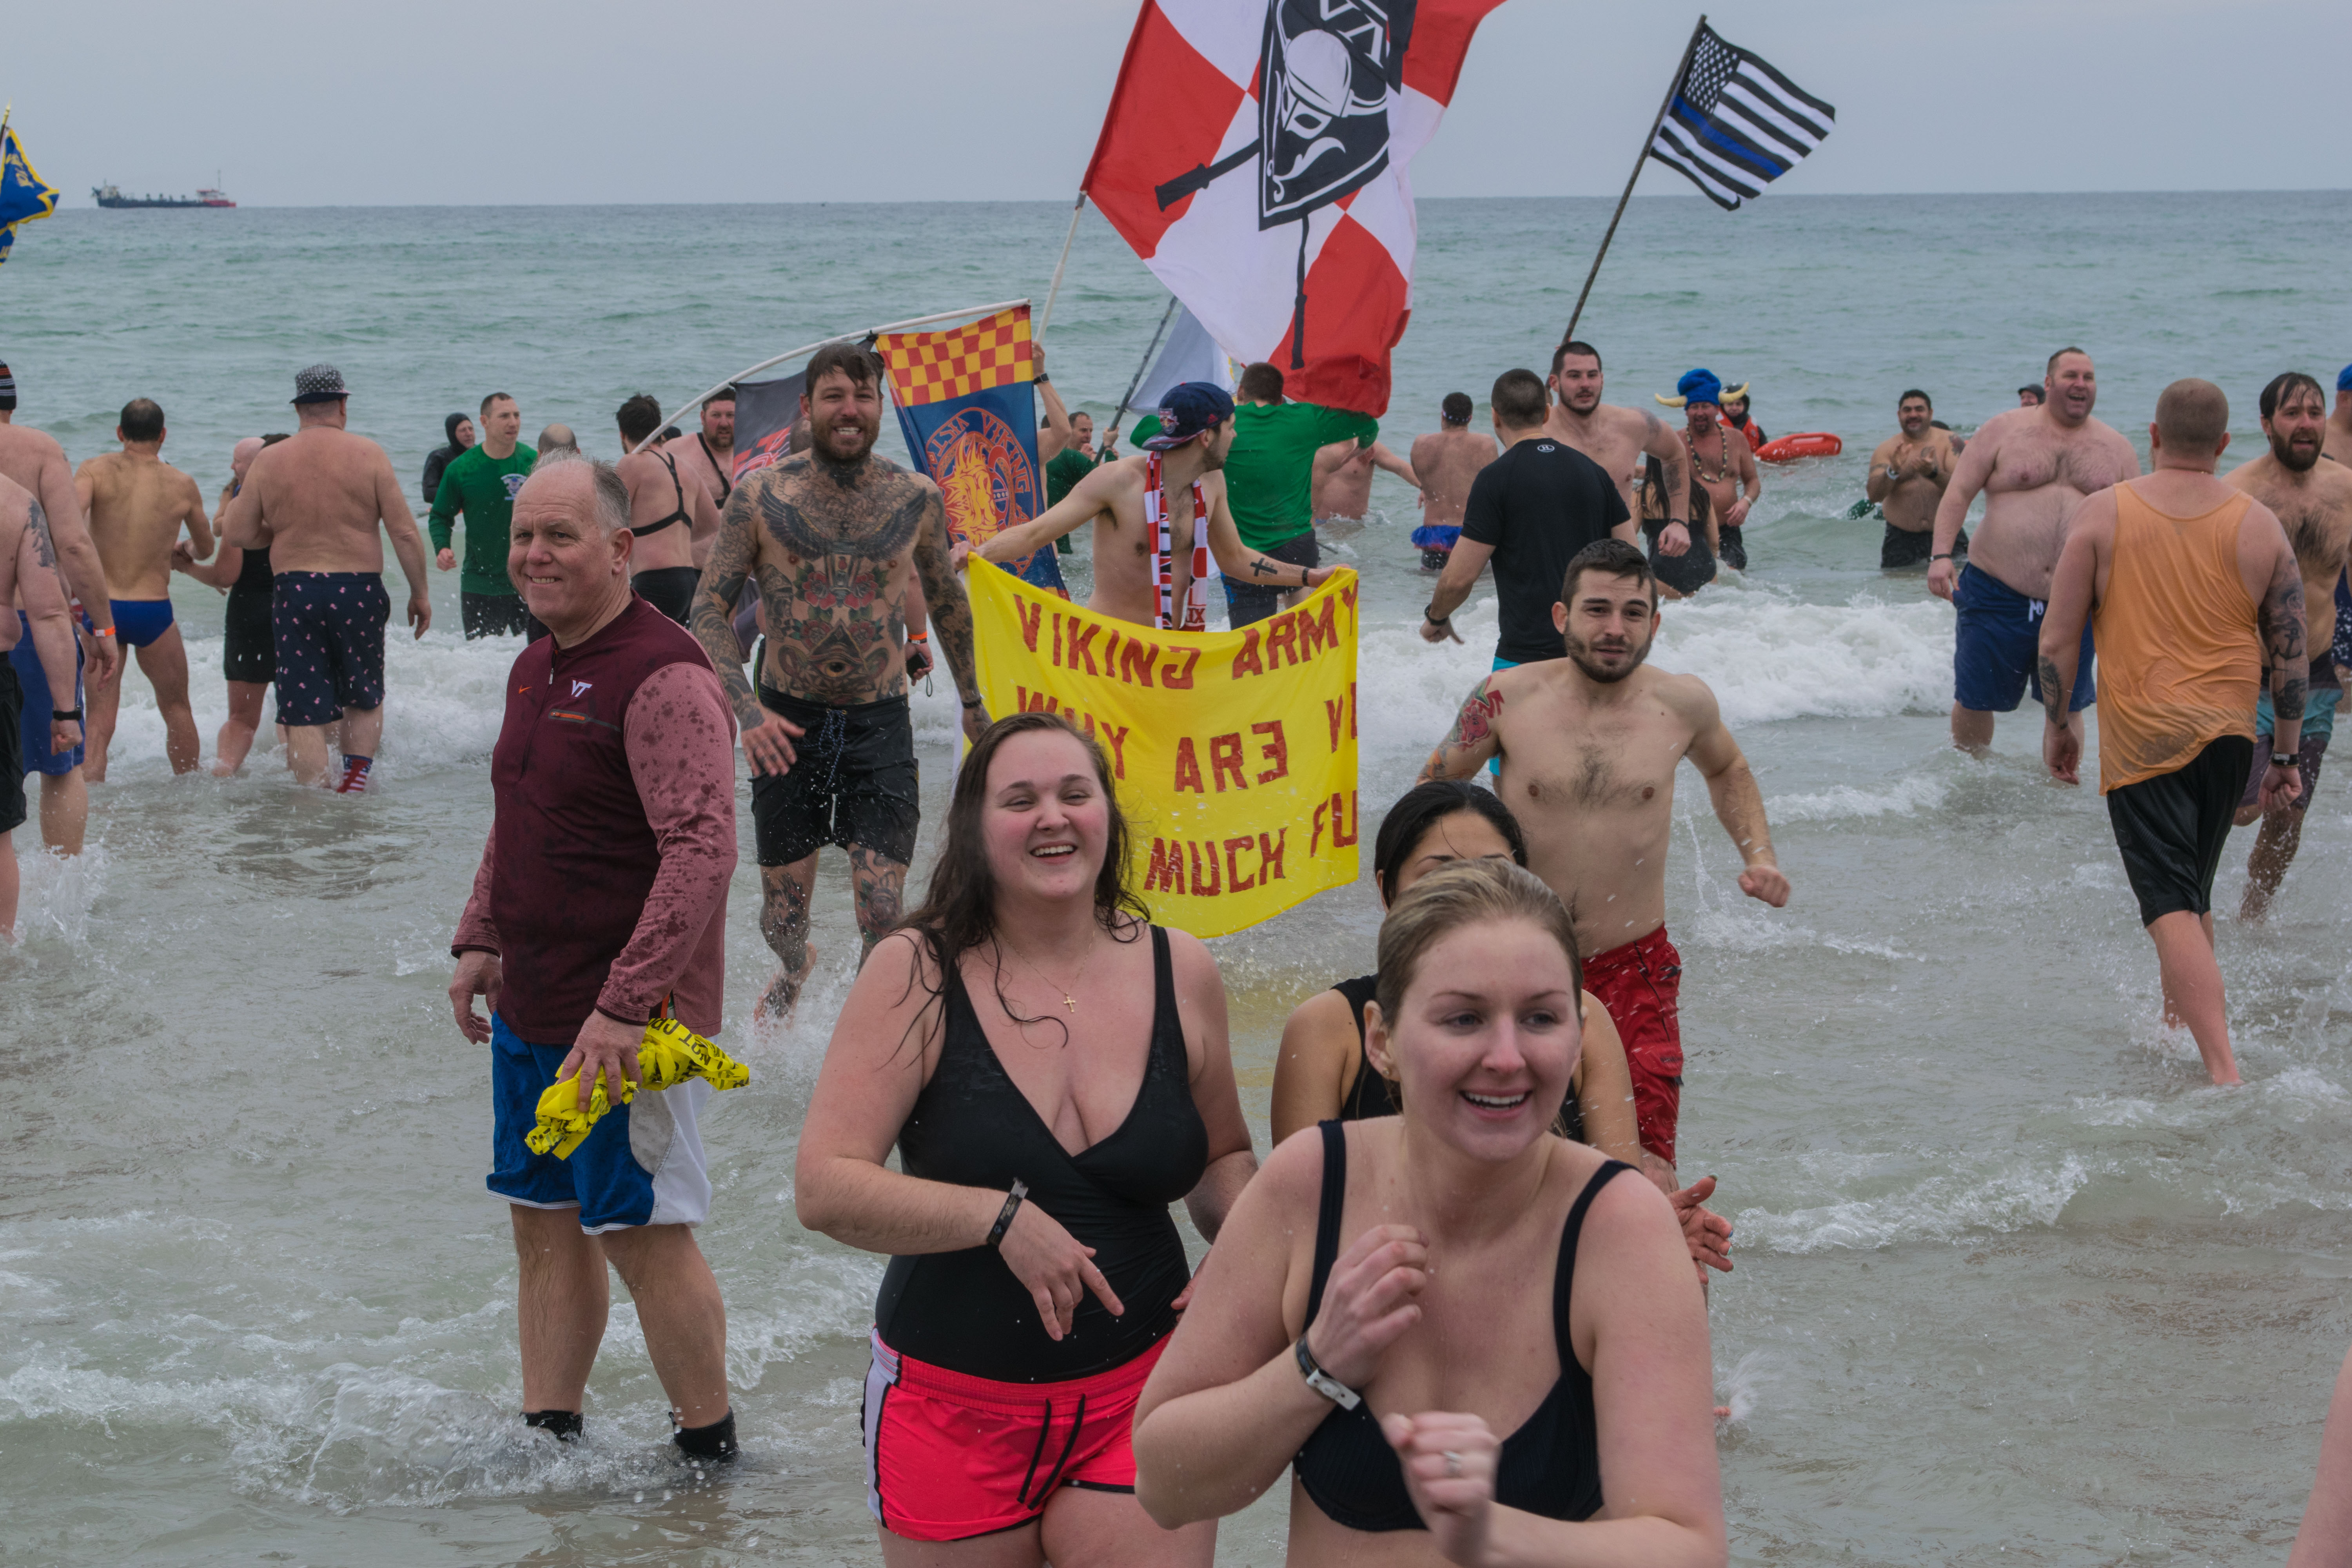 Participants in the 2019 Seaside Heights Polar Plunge. (Photo: Daniel Nee)